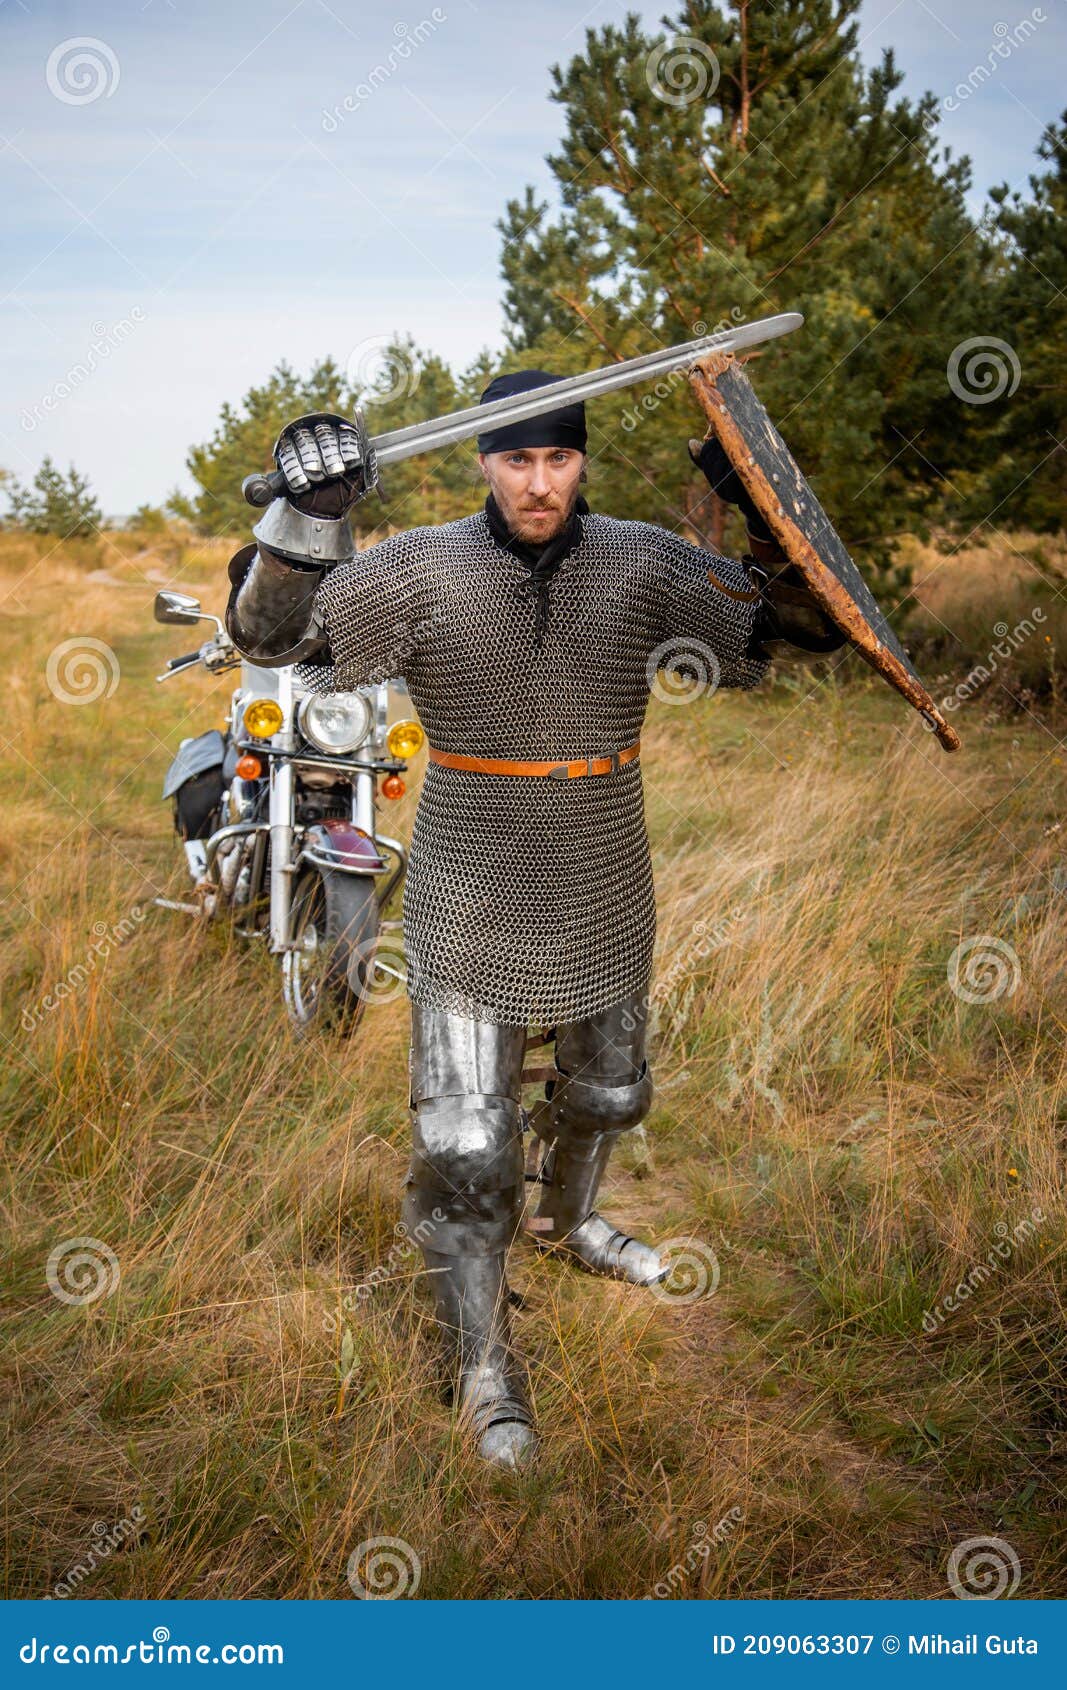 https://thumbs.dreamstime.com/z/knight-chainmail-shield-sword-his-hands-stands-against-backdrop-motorcycle-forest-medieval-209063307.jpg